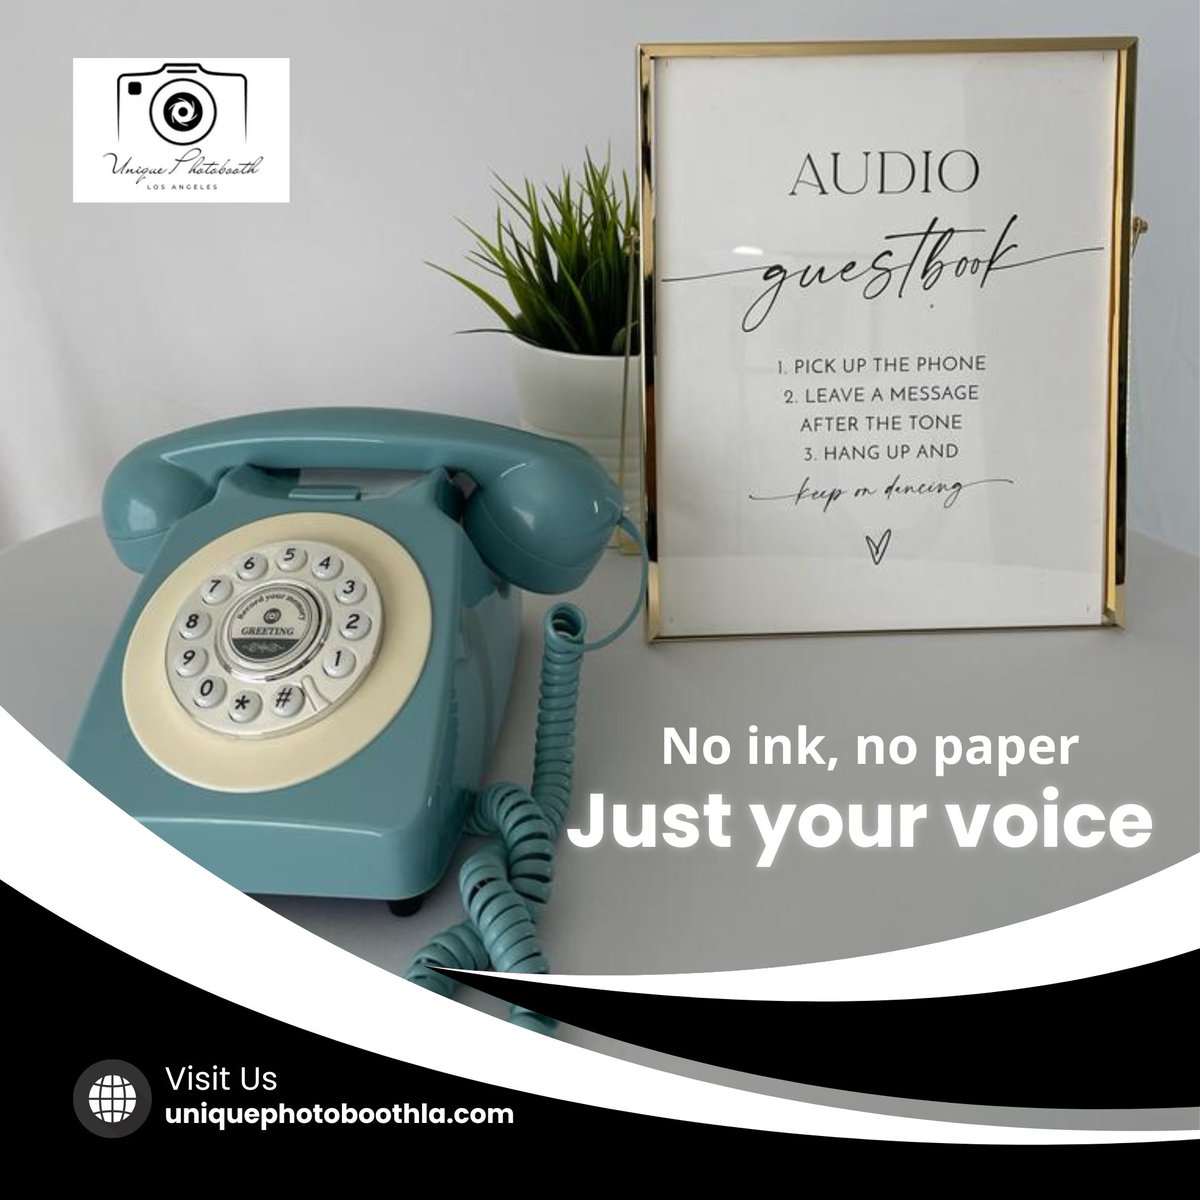 Leave your heartfelt message here in our audio guest book. Your words will echo through the years, reminding us of the joy and love shared on this day #360photobooth #photoboothrental #weddingphotobooth #partyrental #photobooth #Losangeles #SanFernandovalley #audioguestbook